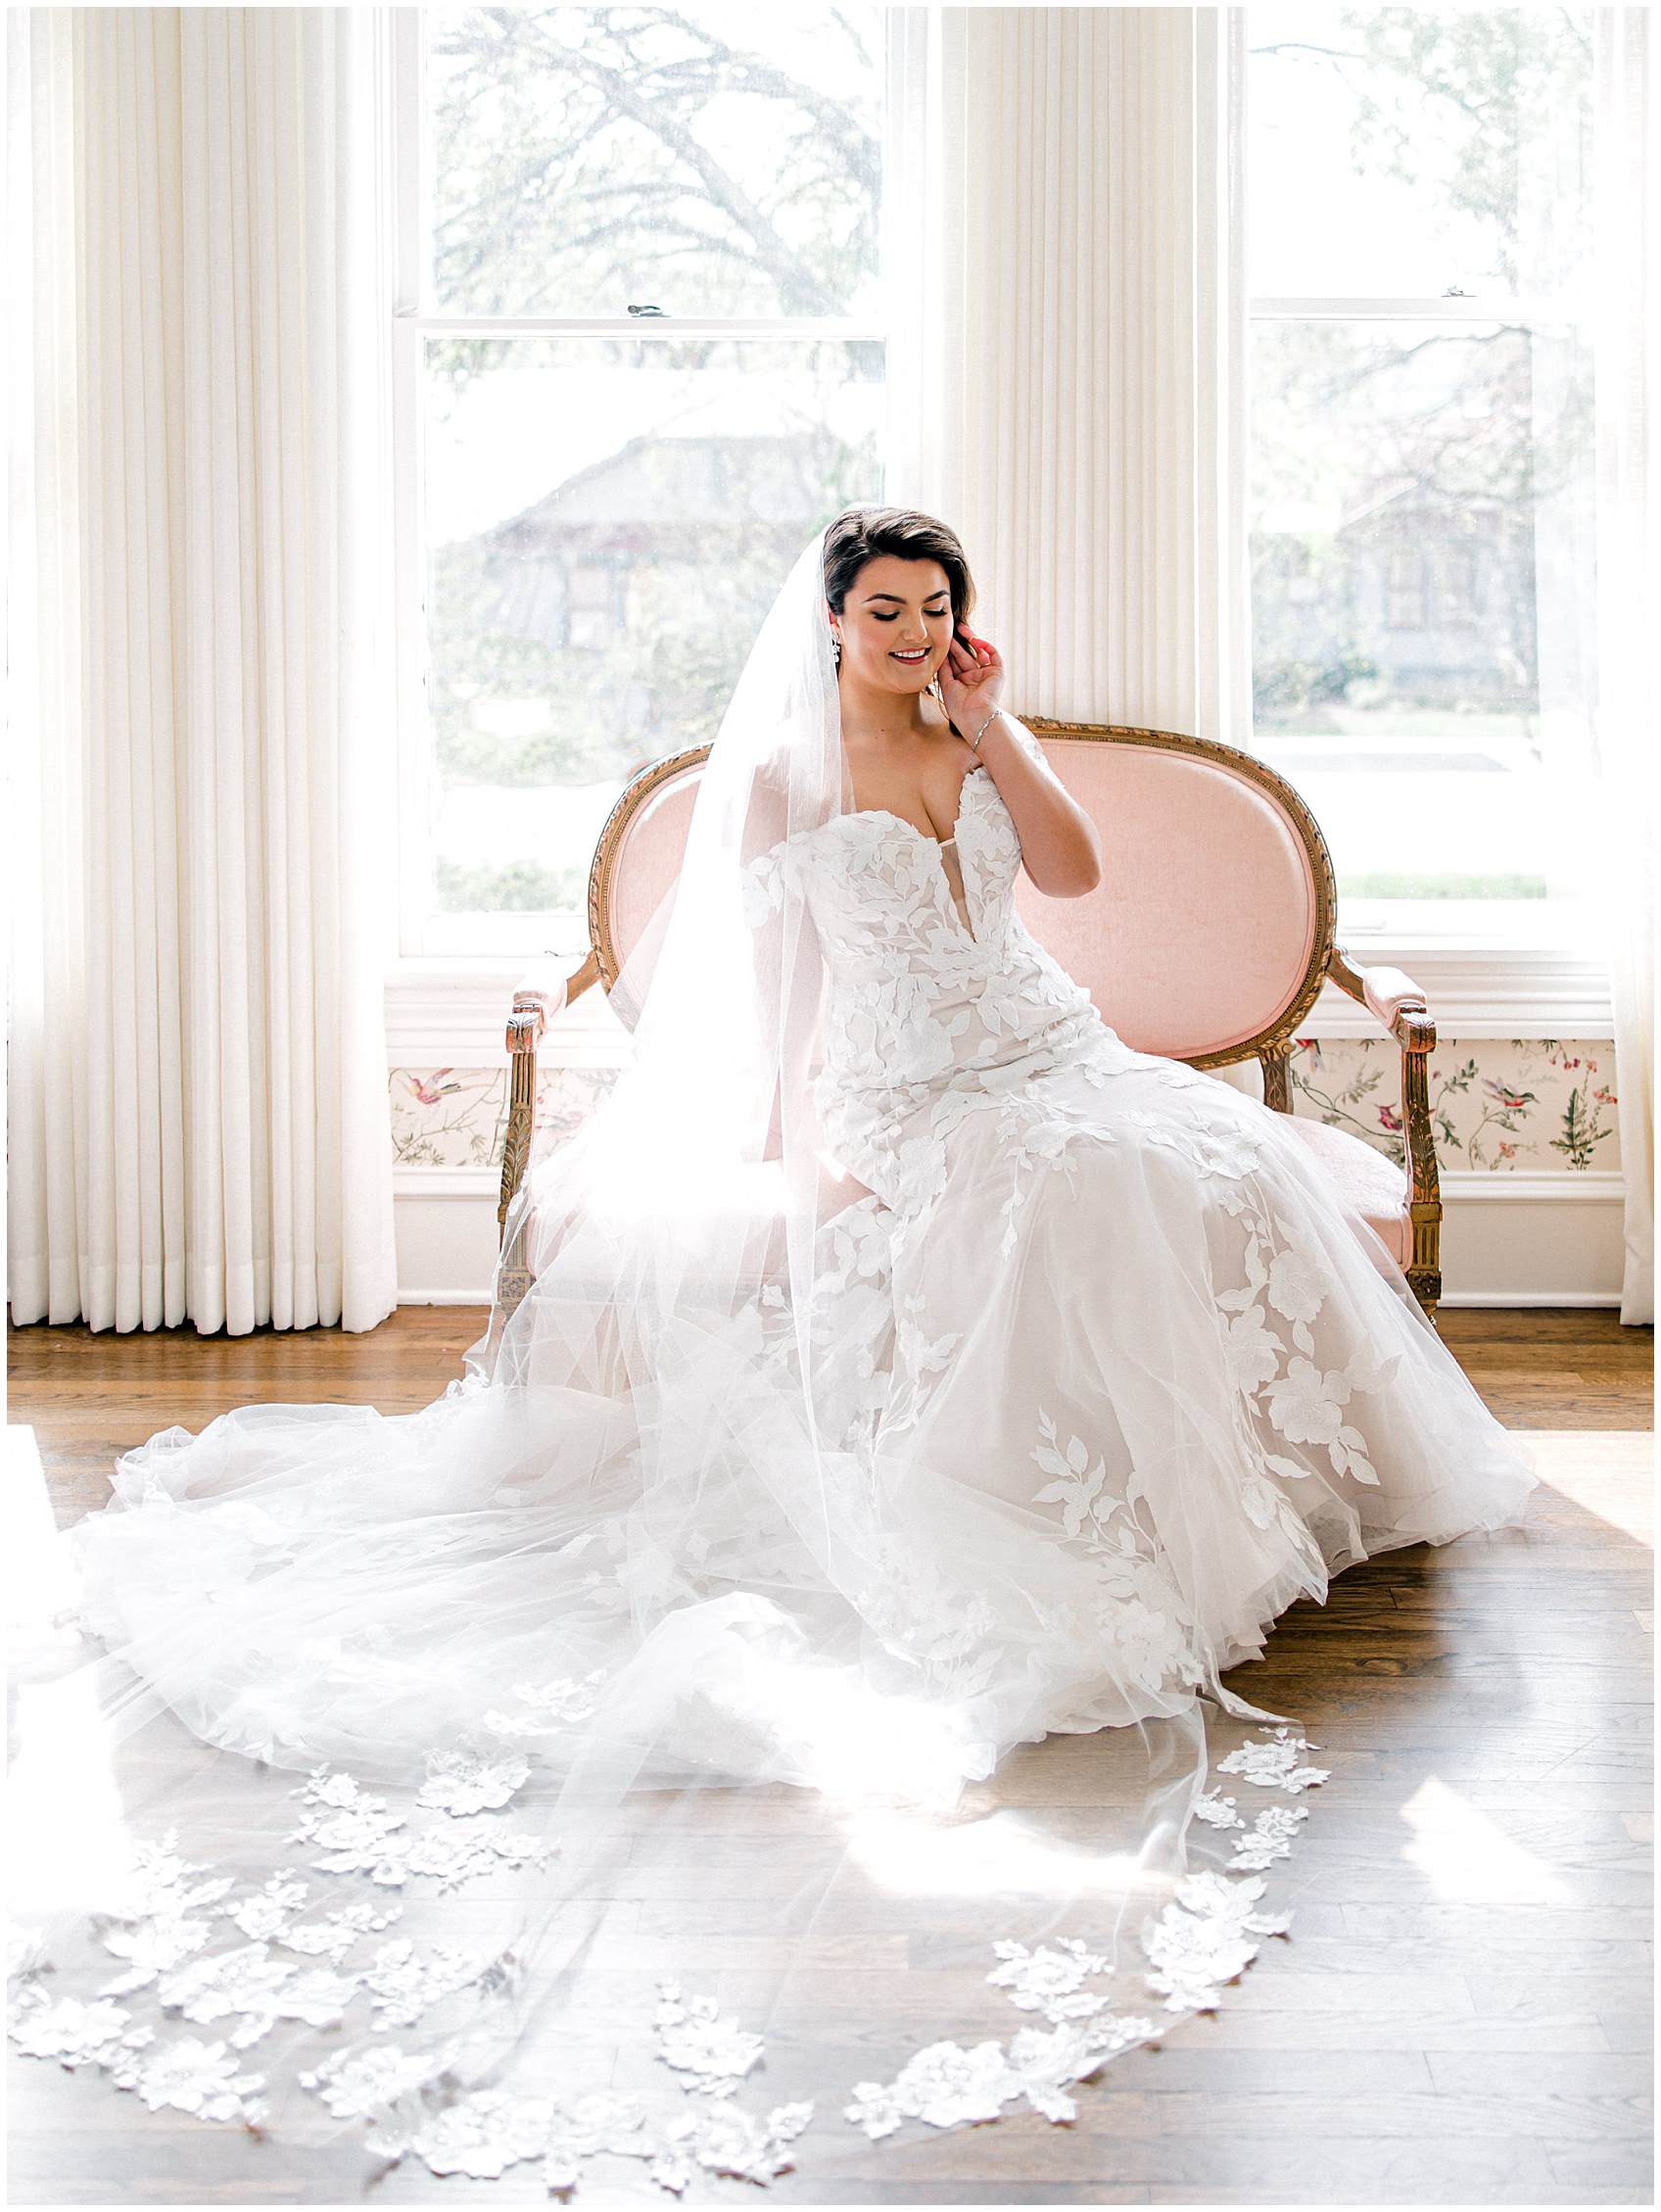 Woodbine Mansion Spring Bridal wedding Photos by Allison Jeffers Photography 0007